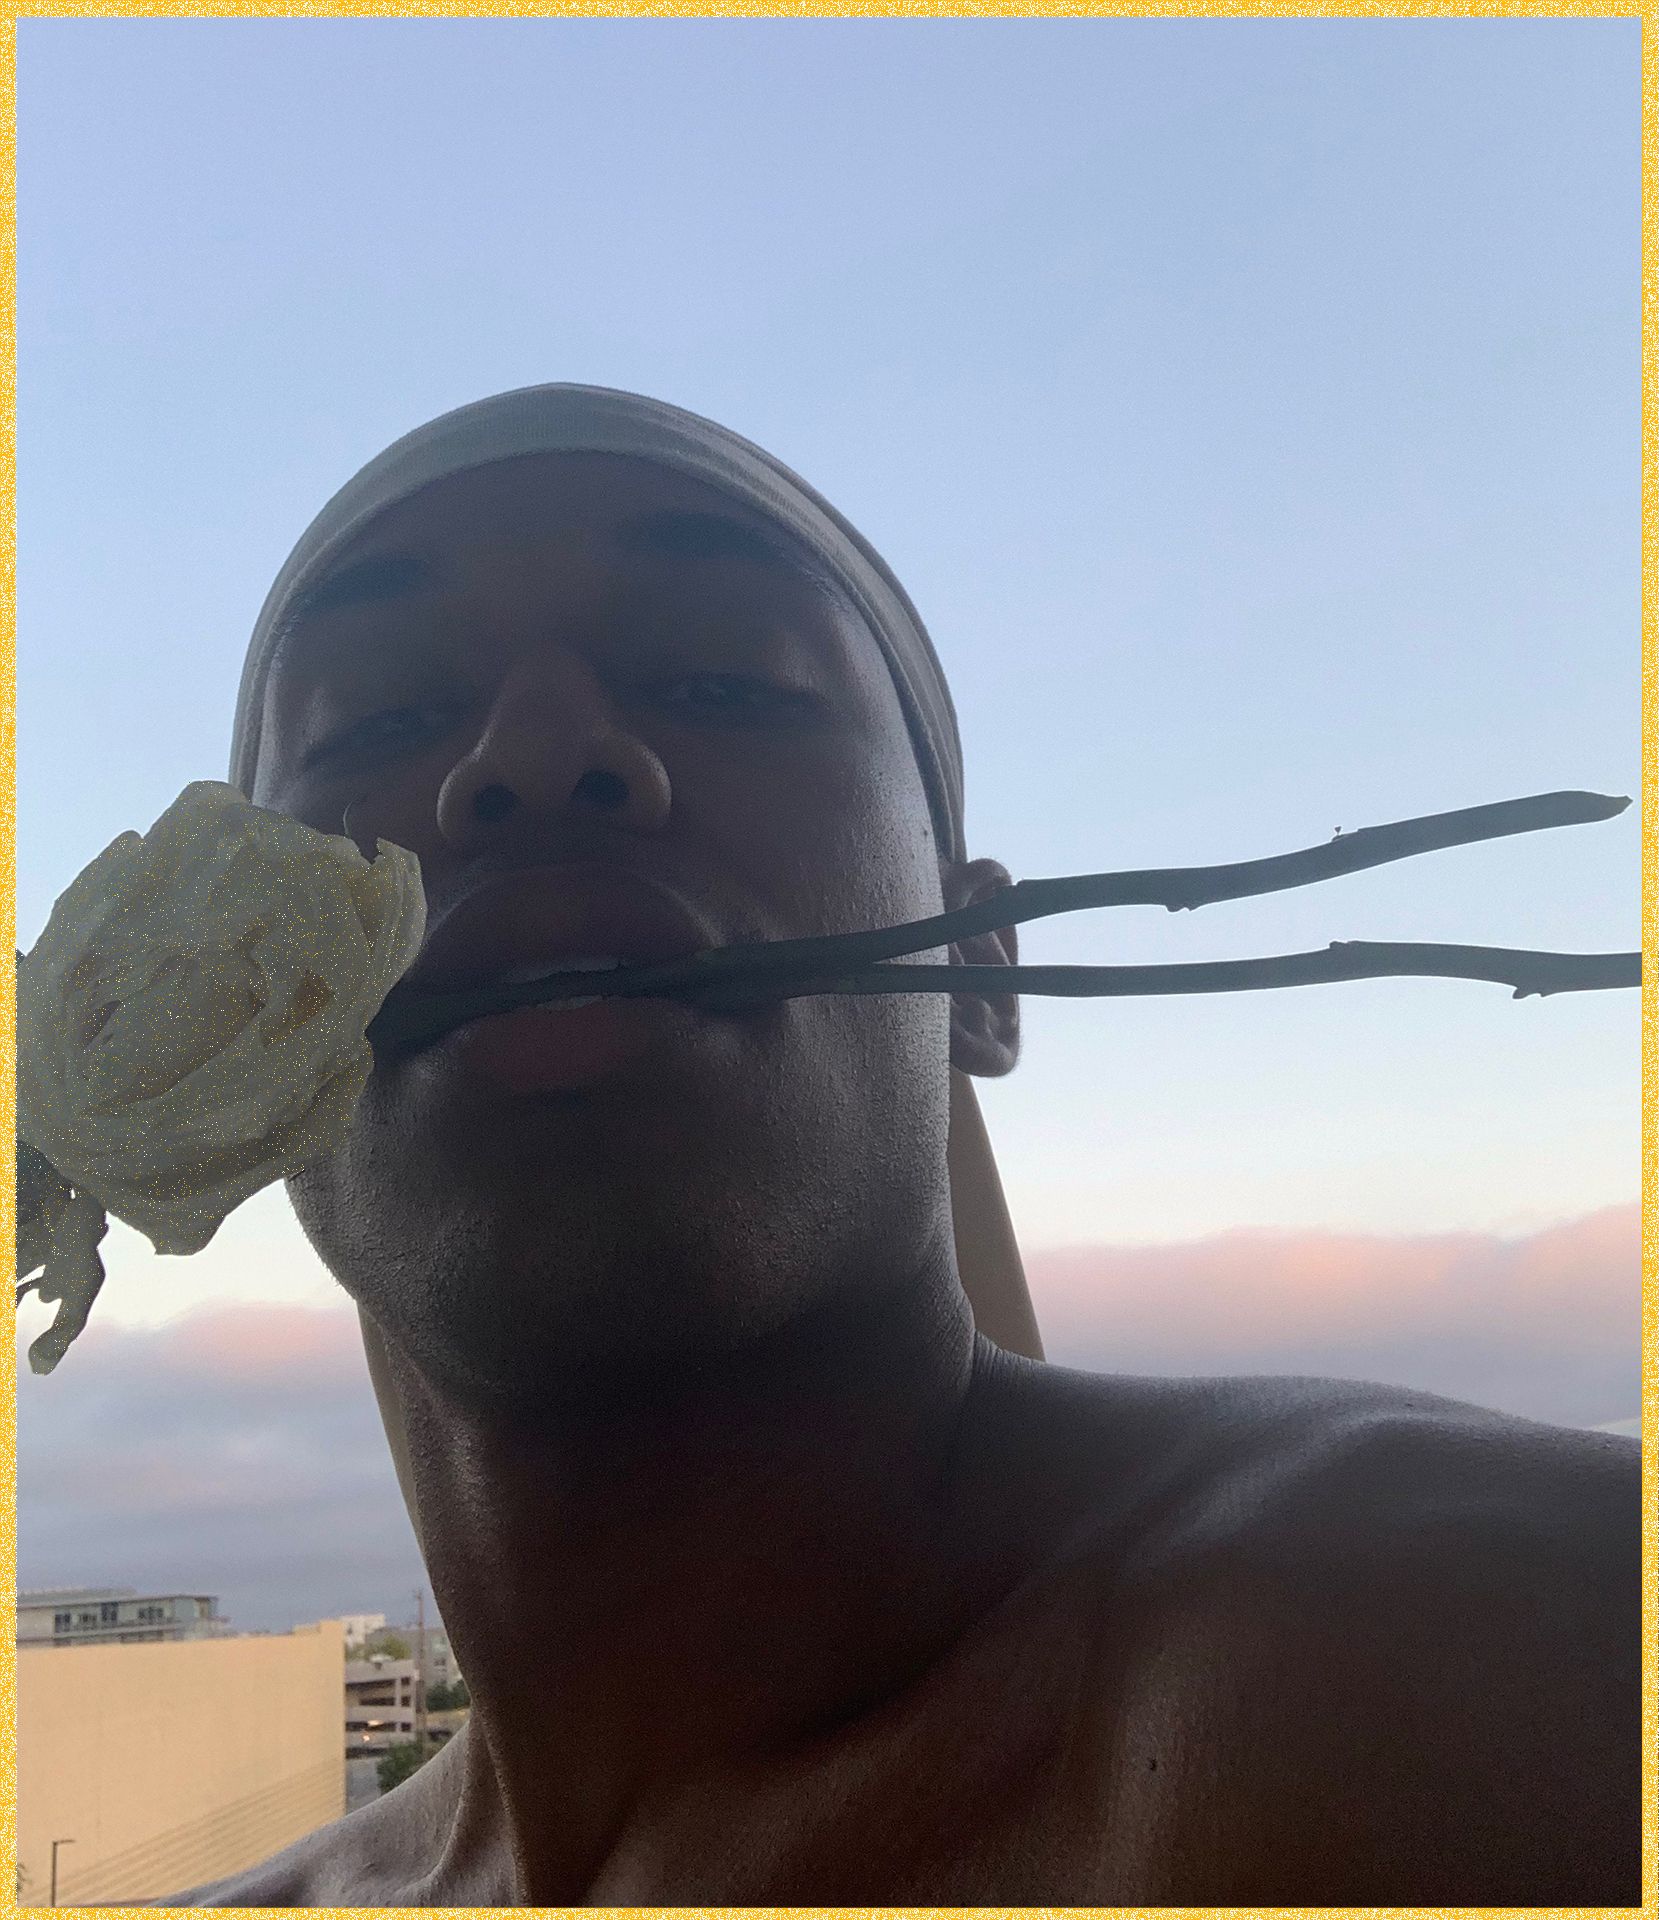 Kelvin Harrison Jr. cover self-portrait posing with yellow flowers in mouth